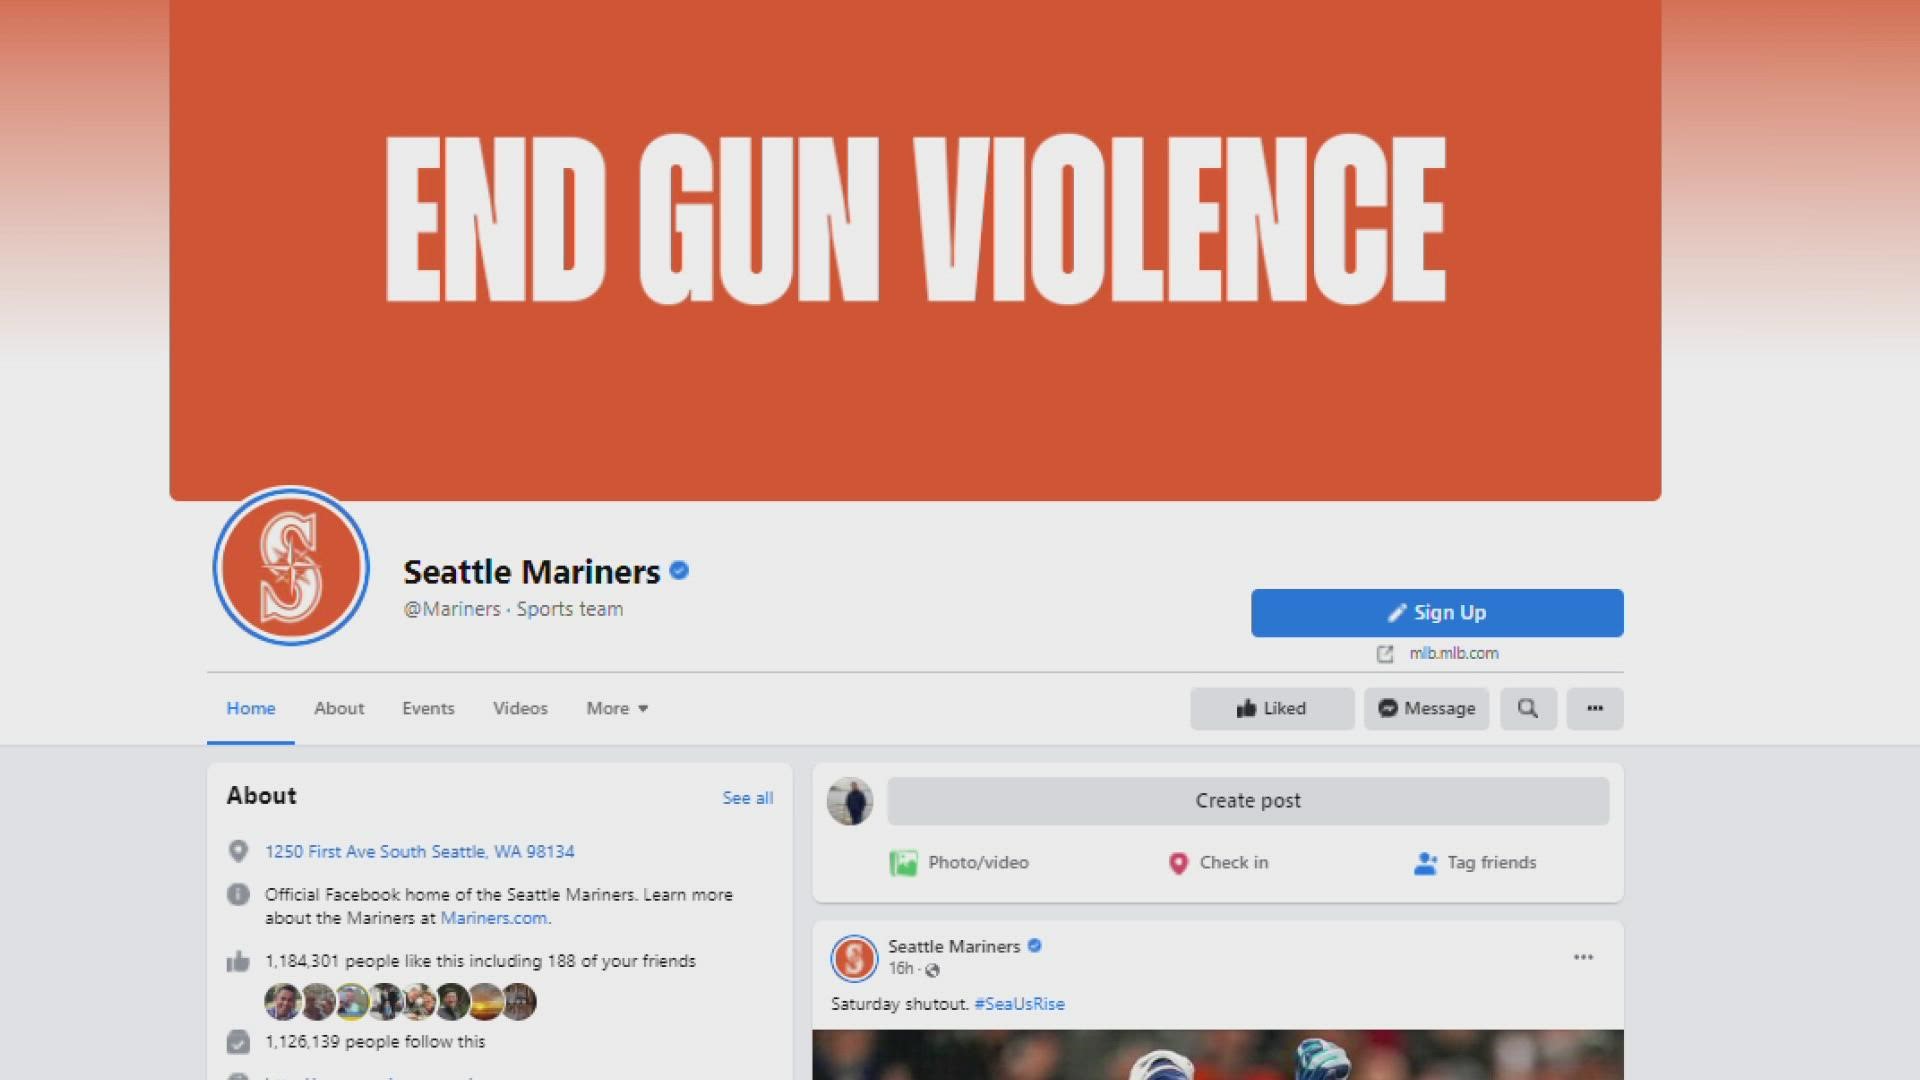 "End Gun Violence" can be seen on all of the Mariners' social media pages.